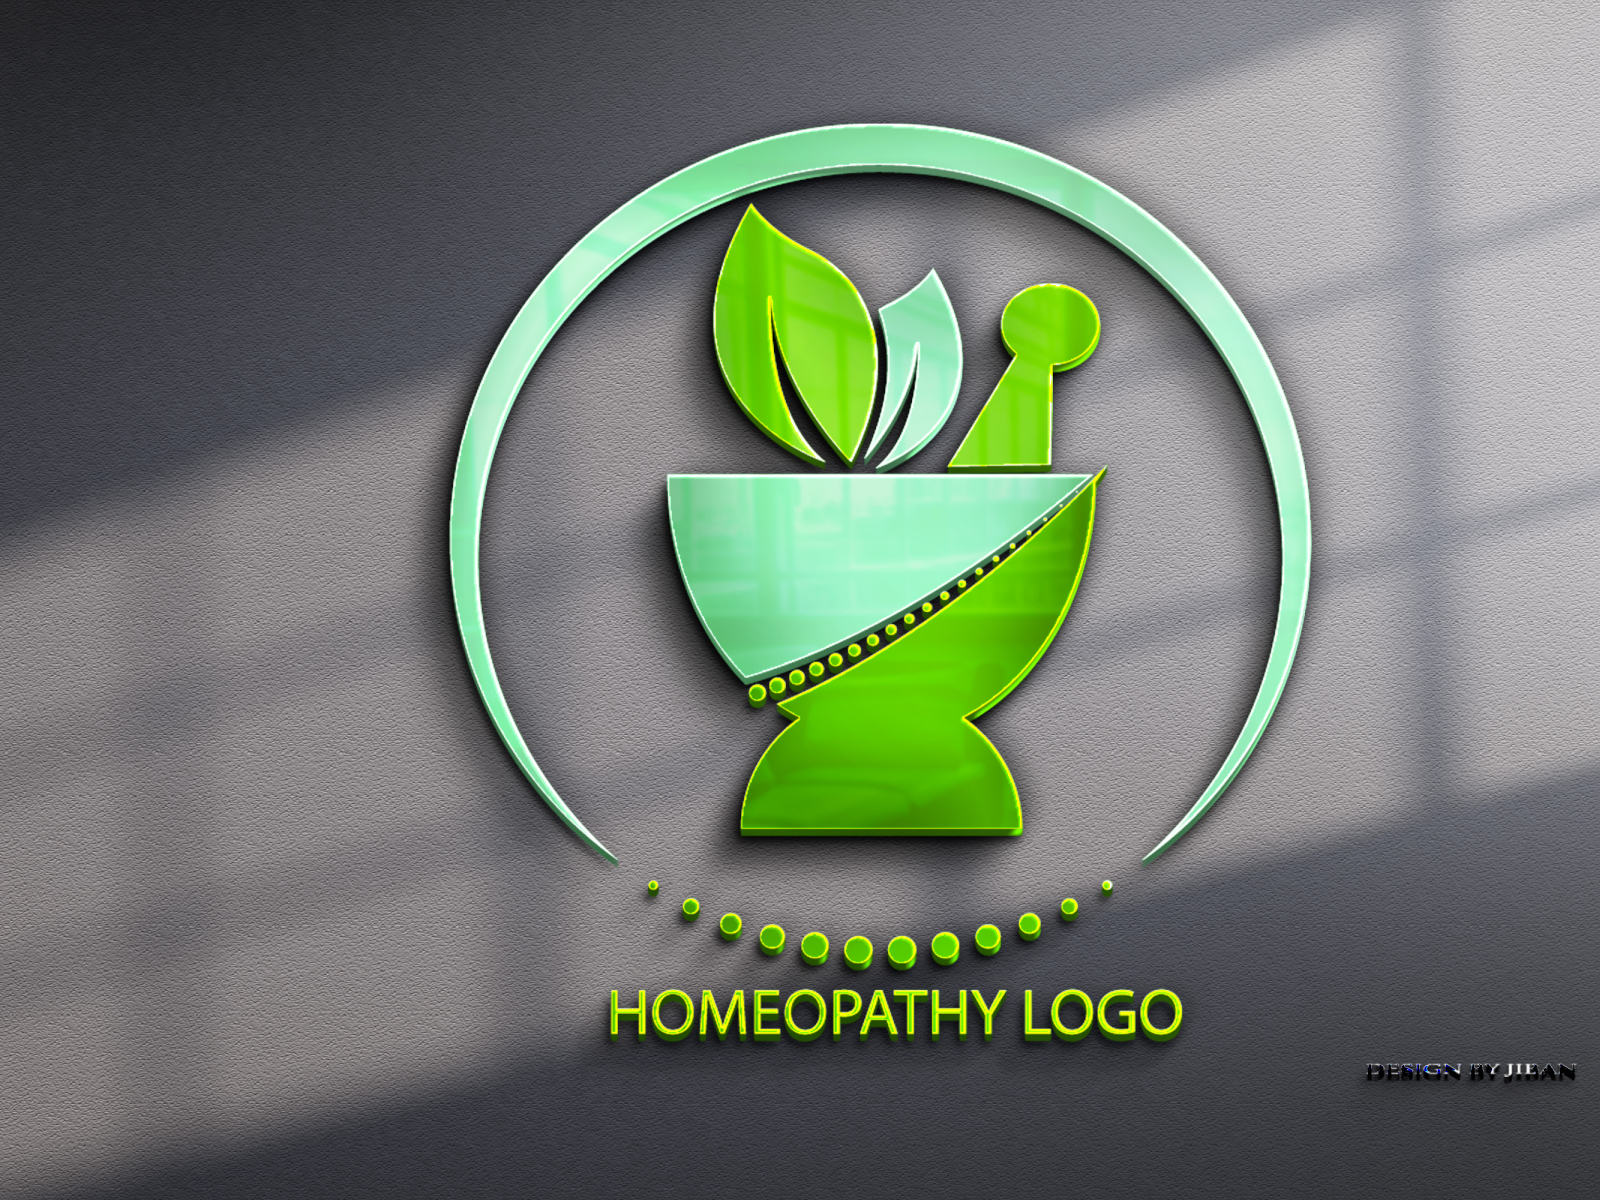 Serious, Professional, Health And Wellness Logo Design for Homeopathy -  21st century science by crescentTouch | Design #11944548